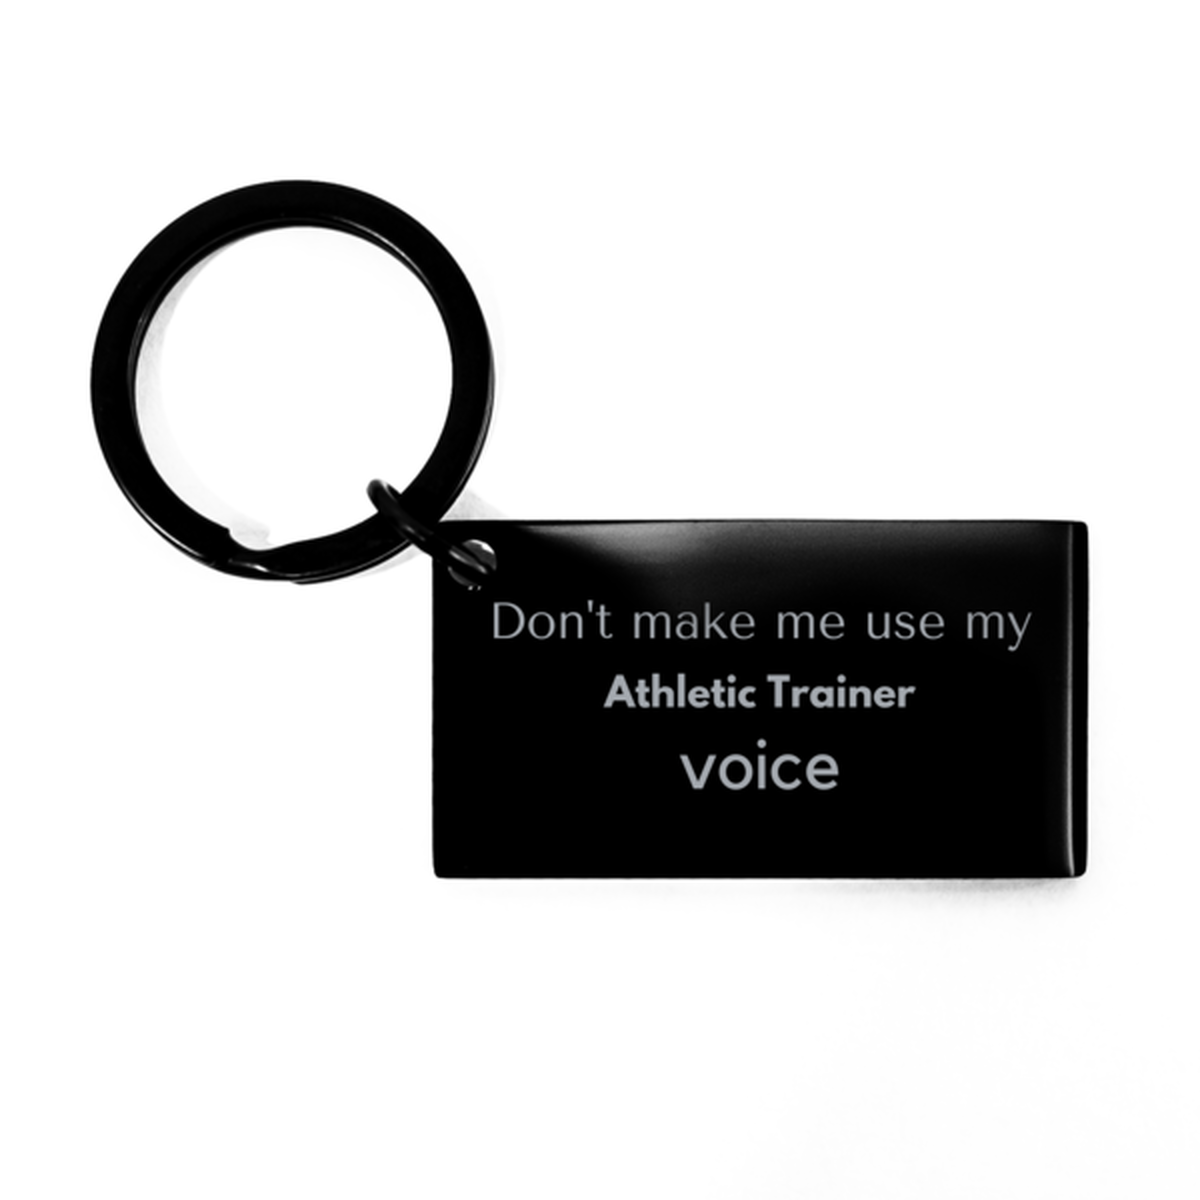 Don't make me use my Athletic Trainer voice, Sarcasm Athletic Trainer Gifts, Christmas Athletic Trainer Keychain Birthday Unique Gifts For Athletic Trainer Coworkers, Men, Women, Colleague, Friends